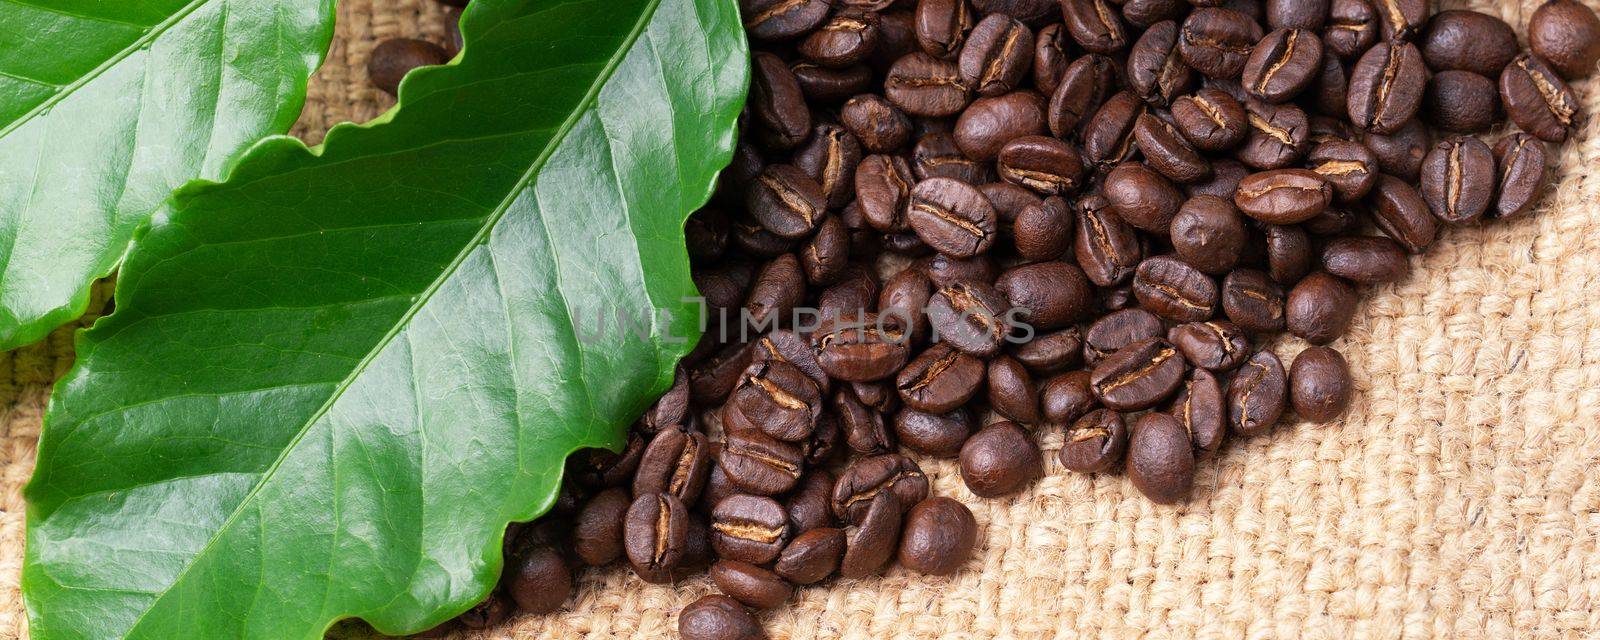 roasted coffee bean on linin sack by anankkml